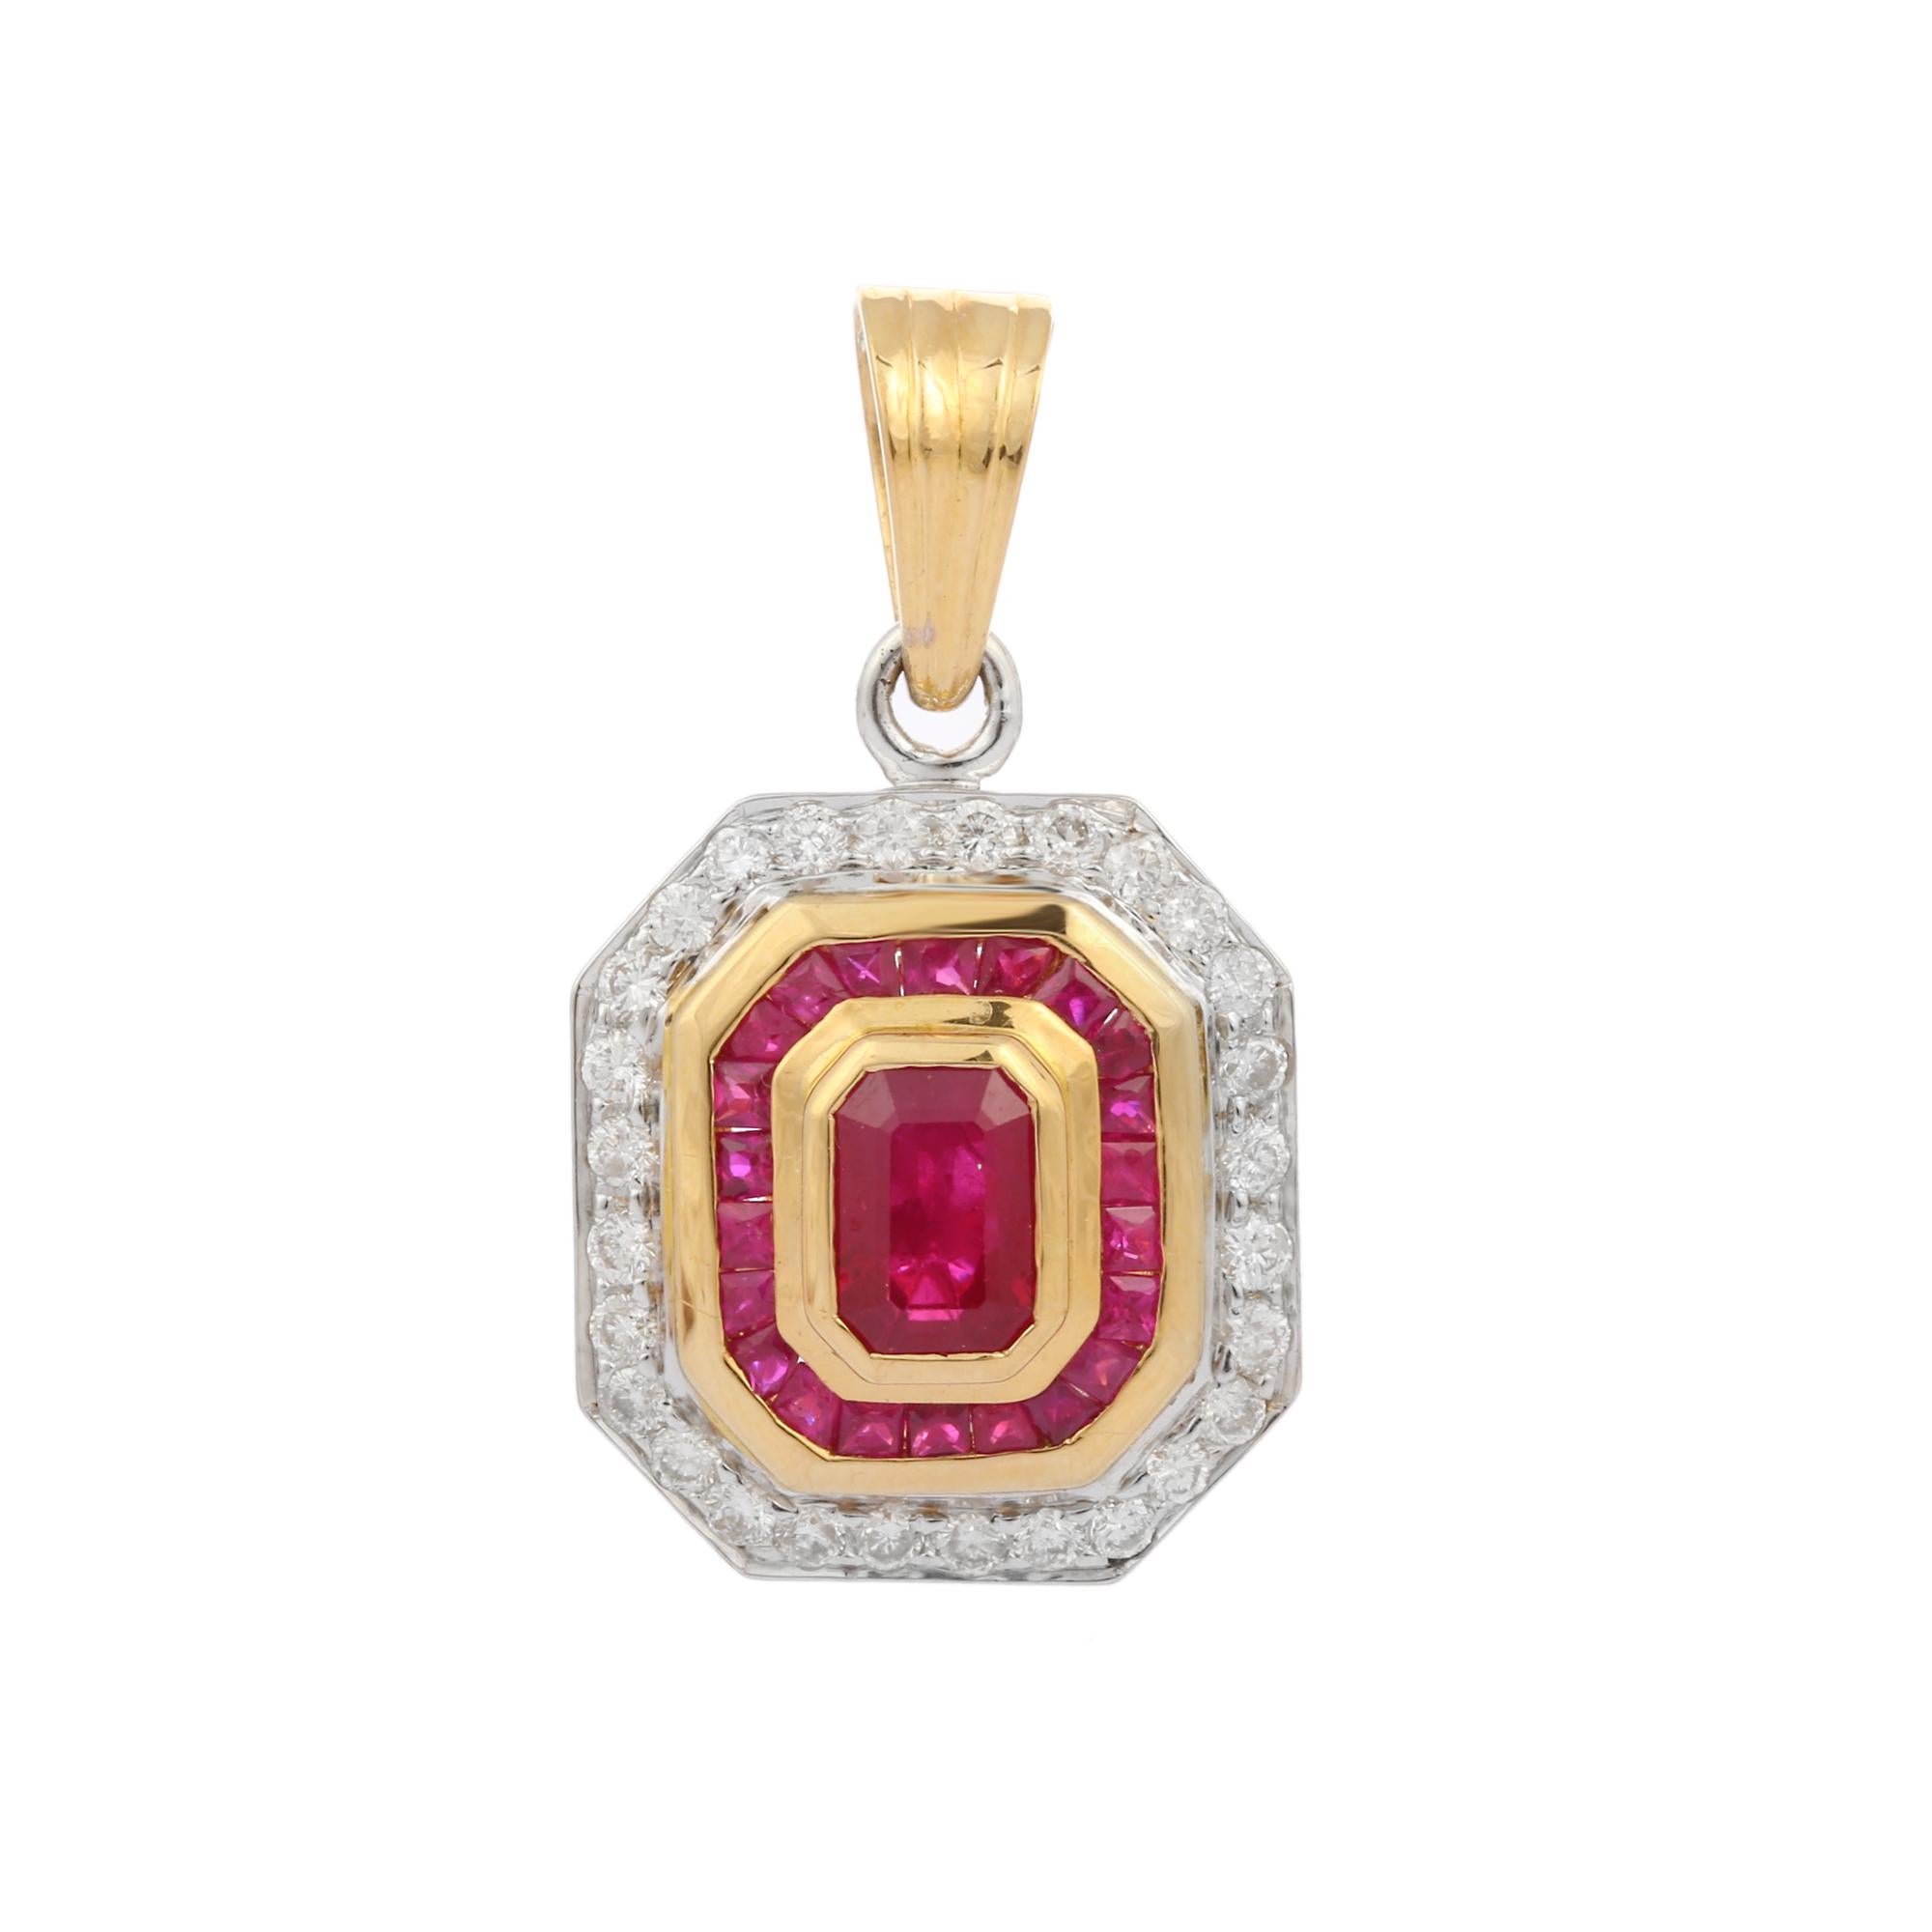 Estate natural ruby and diamond pendant in 18K Gold. It has a octagon cut ruby with diamonds that completes your look with a decent touch. Pendants are used to wear or gifted to represent love and promises. It's an attractive jewelry piece that goes